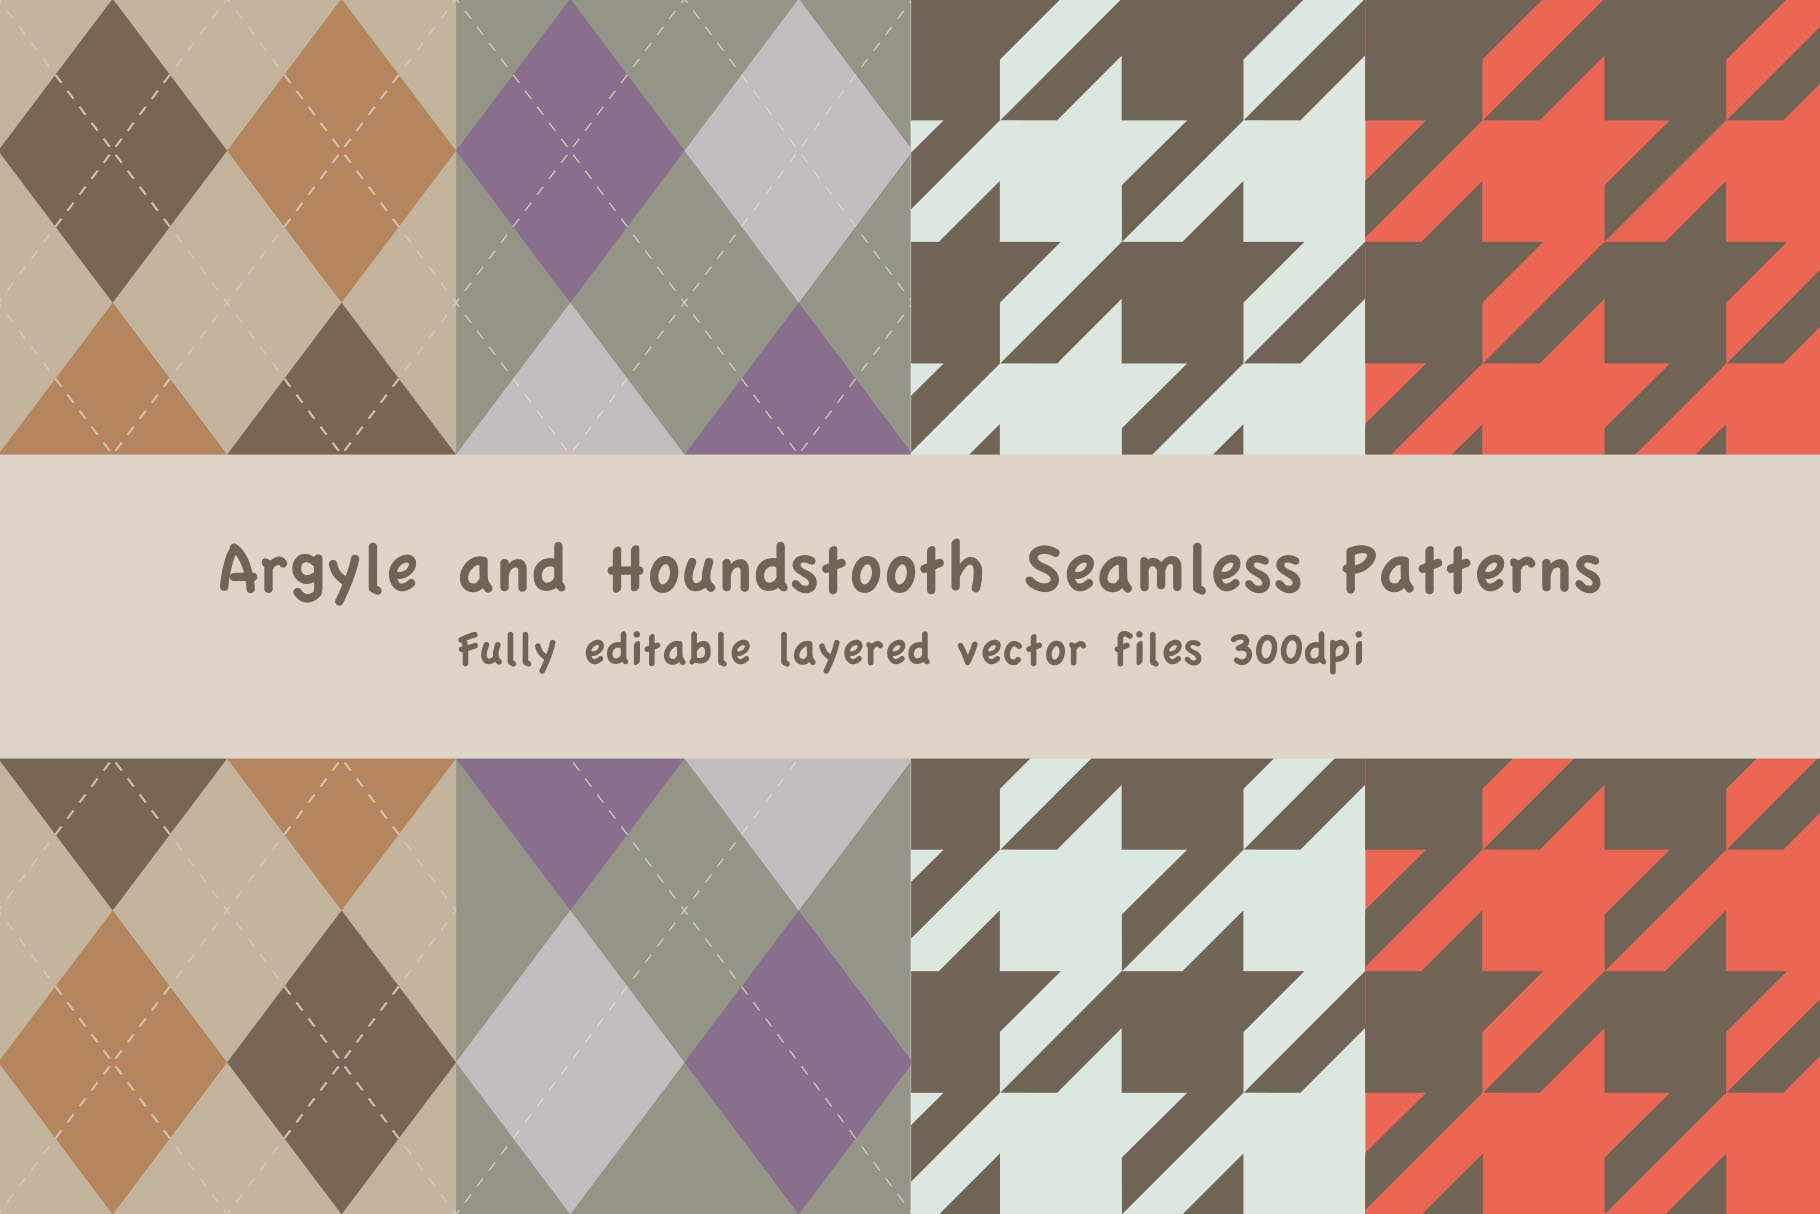 Argyle and Houndstooth Patterns cover image.